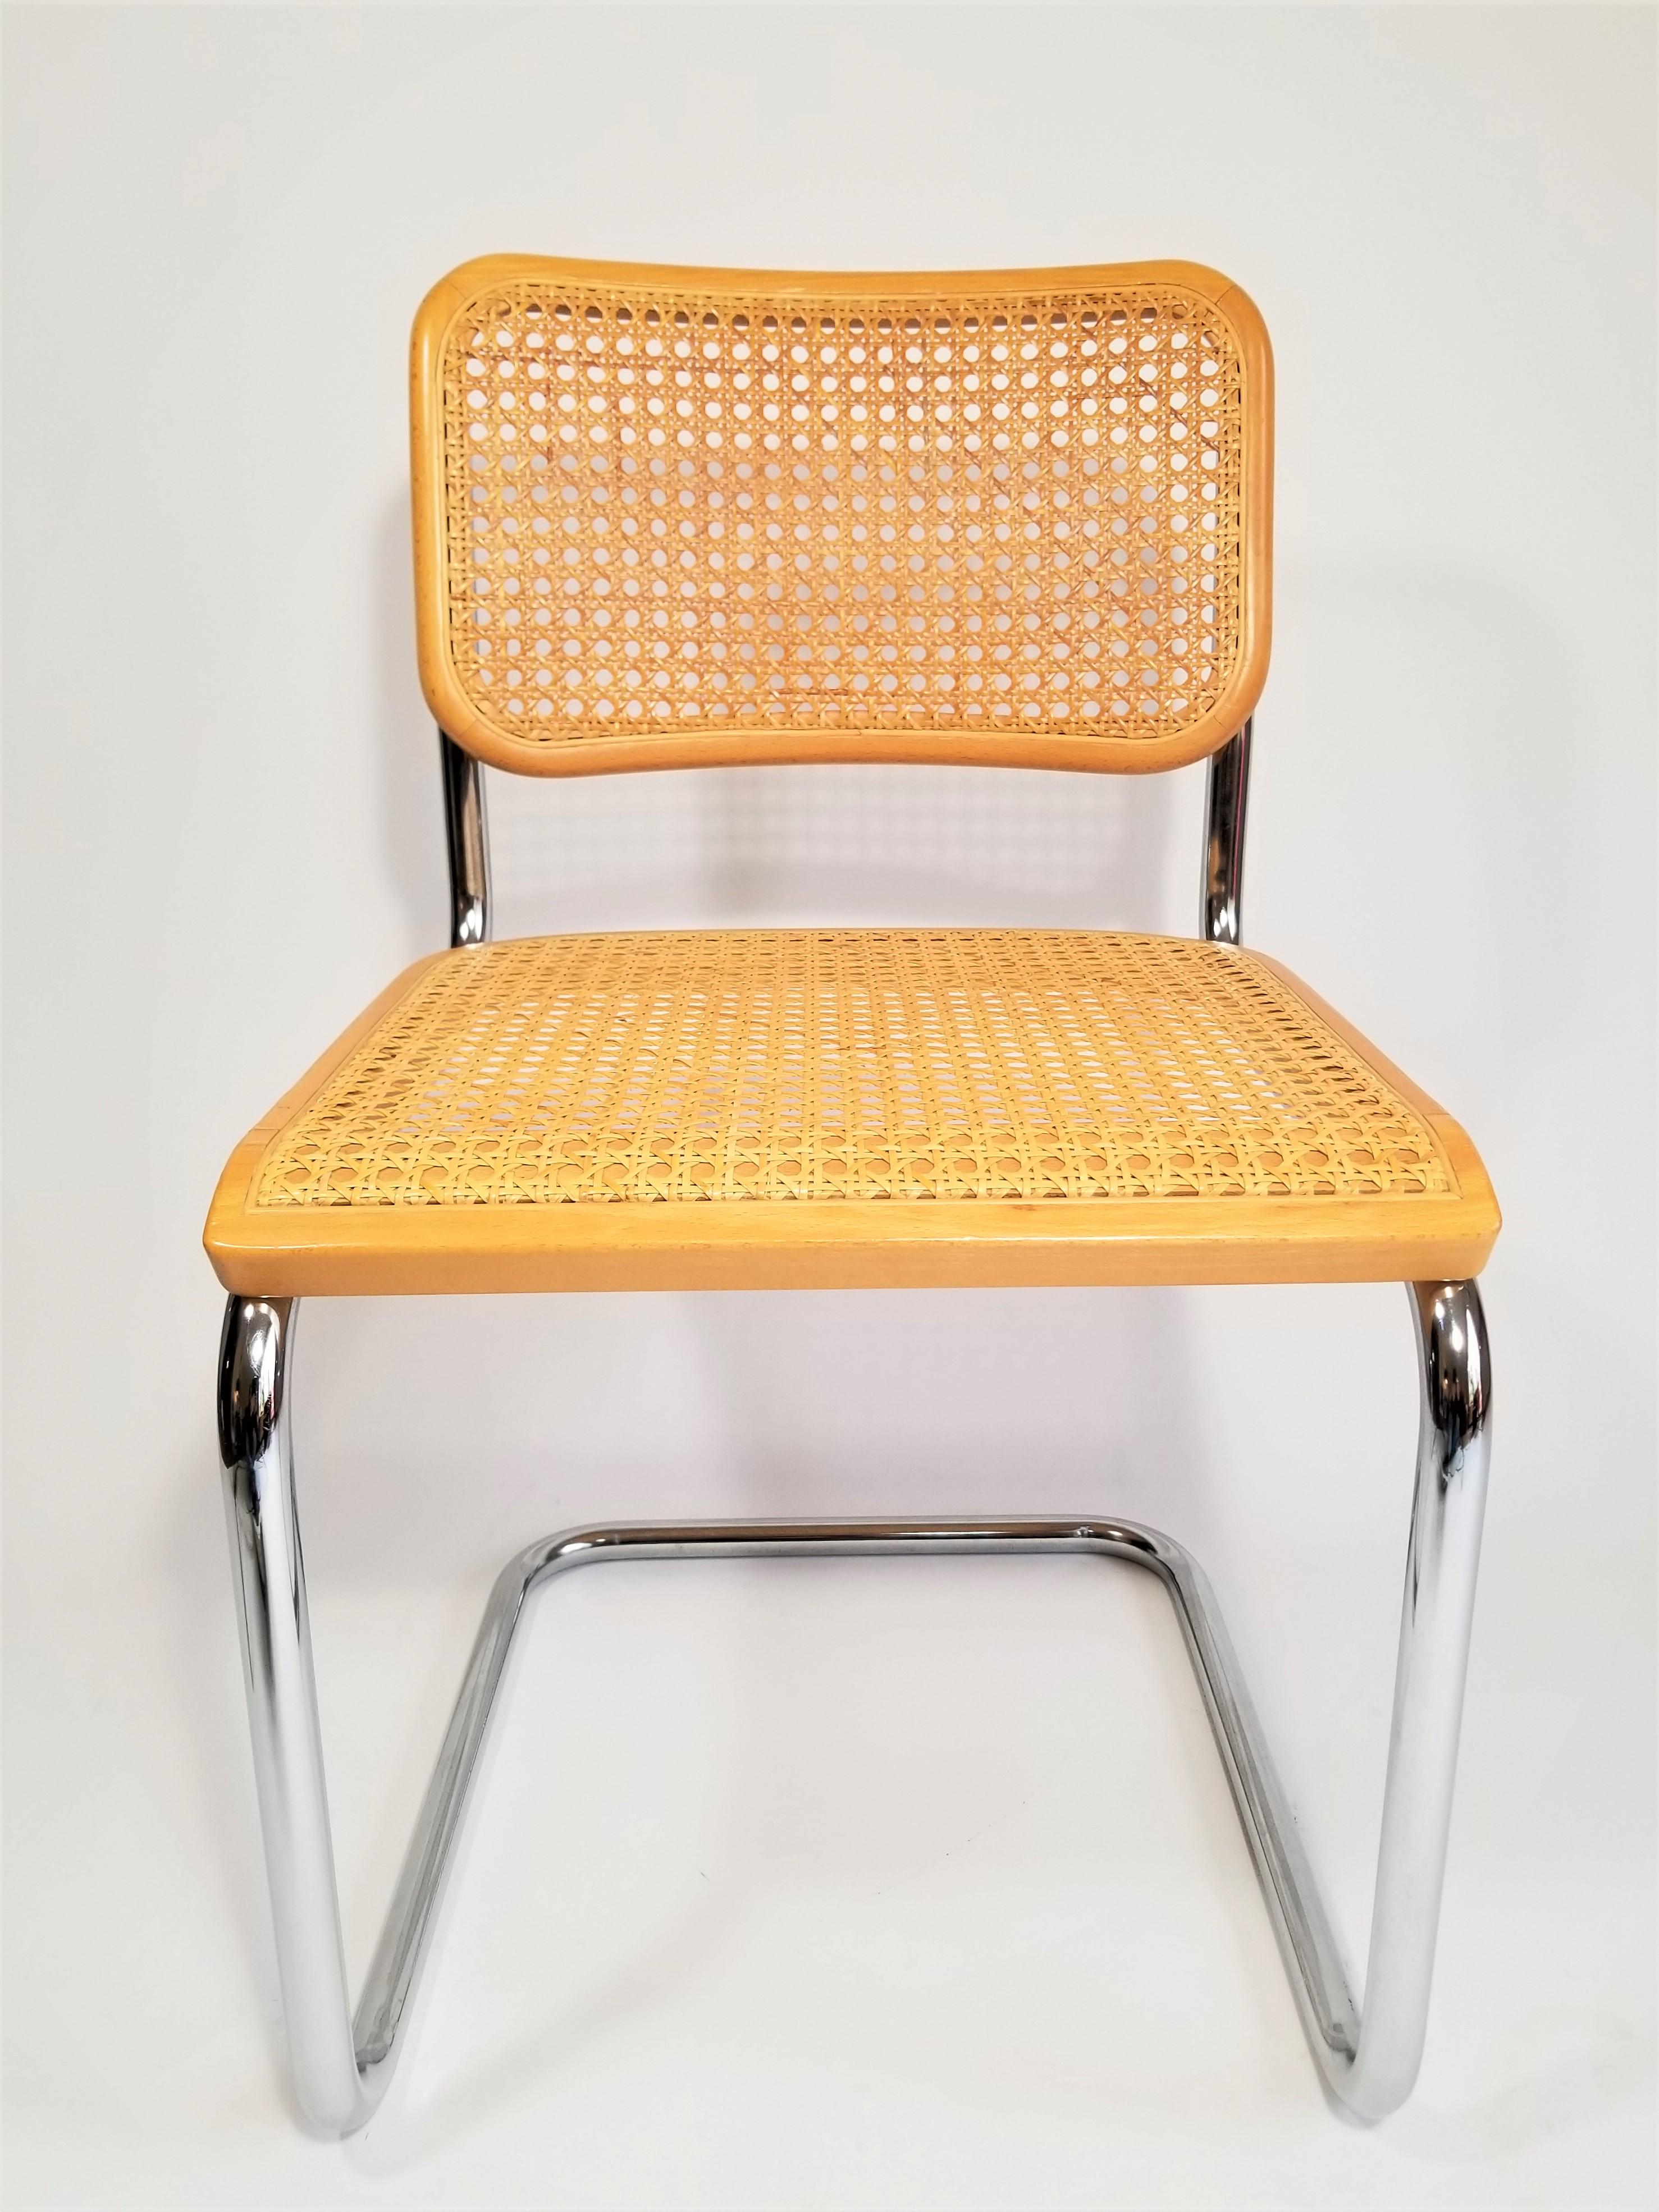 Early production of the Marcel Breuer Cesca side chair made by Thonet. Still retains the original GMF marking tag and is stamped Made in Poland. Very good condition. Chrome has been polished.
Complimentary delivery can be arranged for this item in